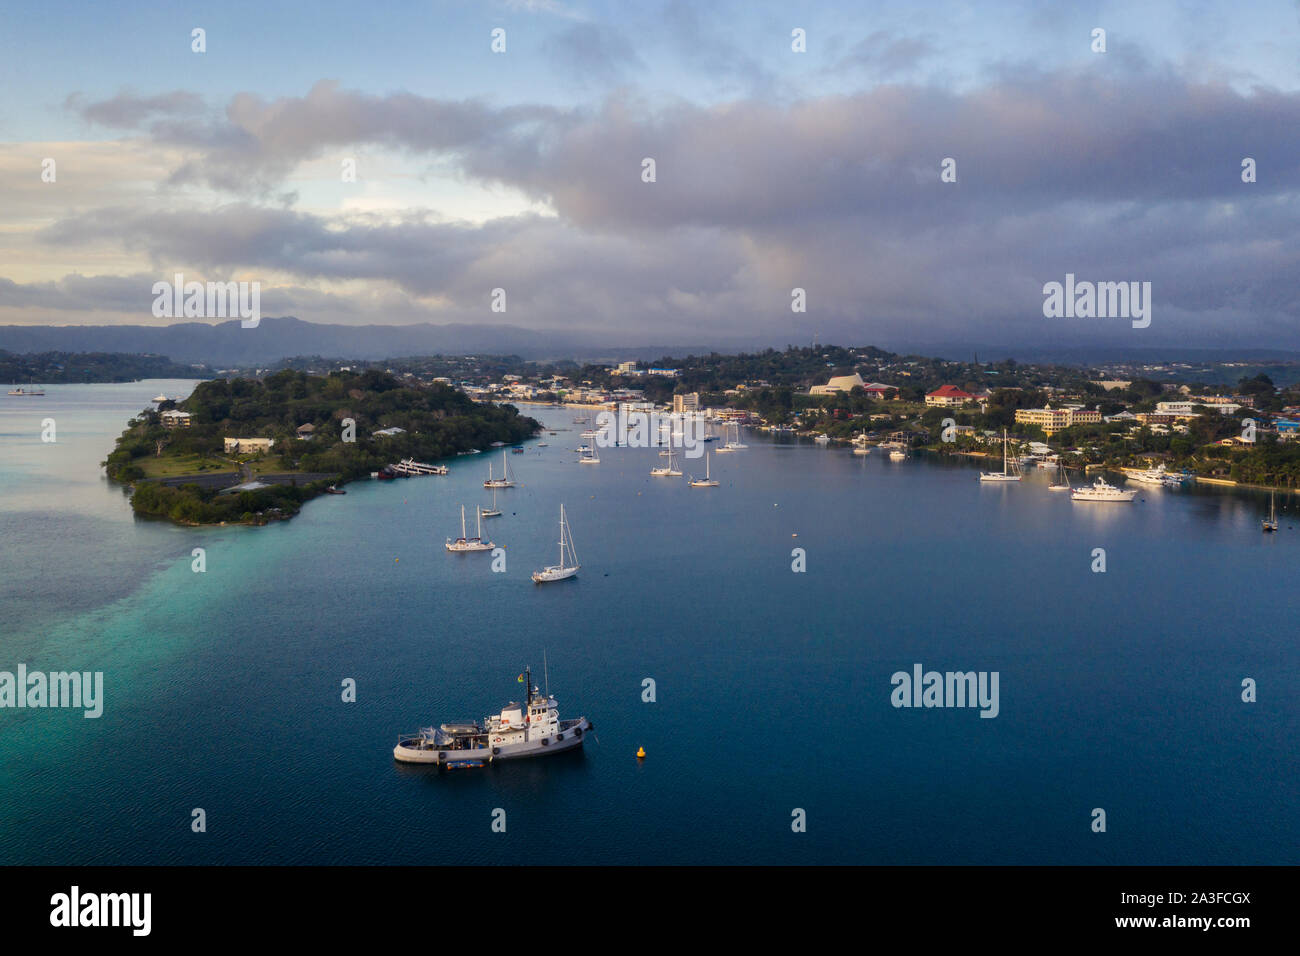 Nightfall over the Port Vila harbor with sailboat and other yachts in Vanuatu capital city of this south Pacific nation Stock Photo